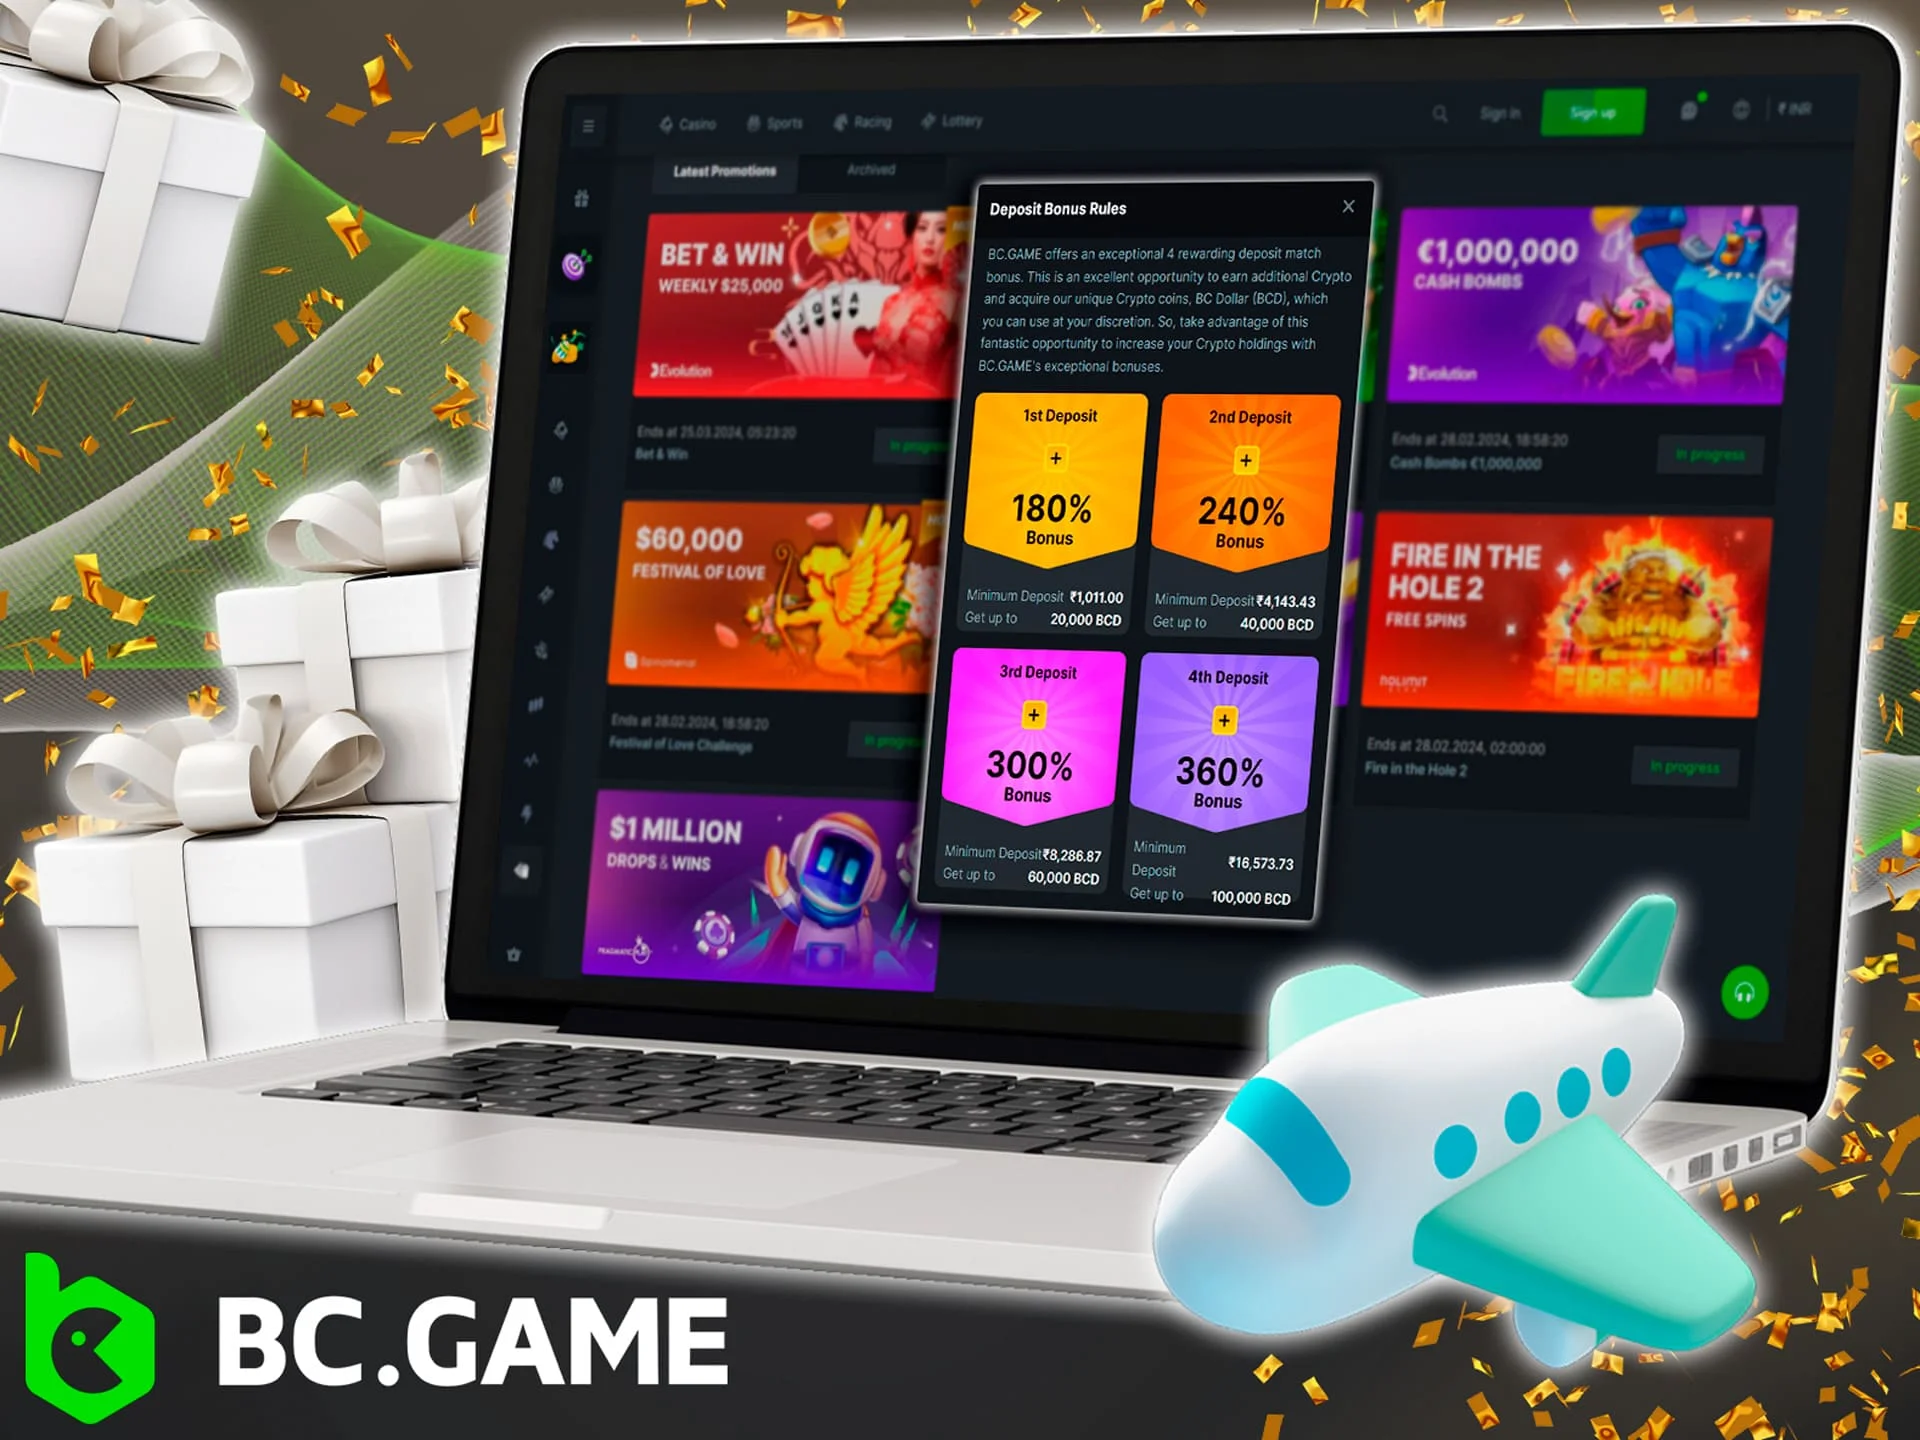 Read the terms and conditions of the BC Game Crash welcome bonus.